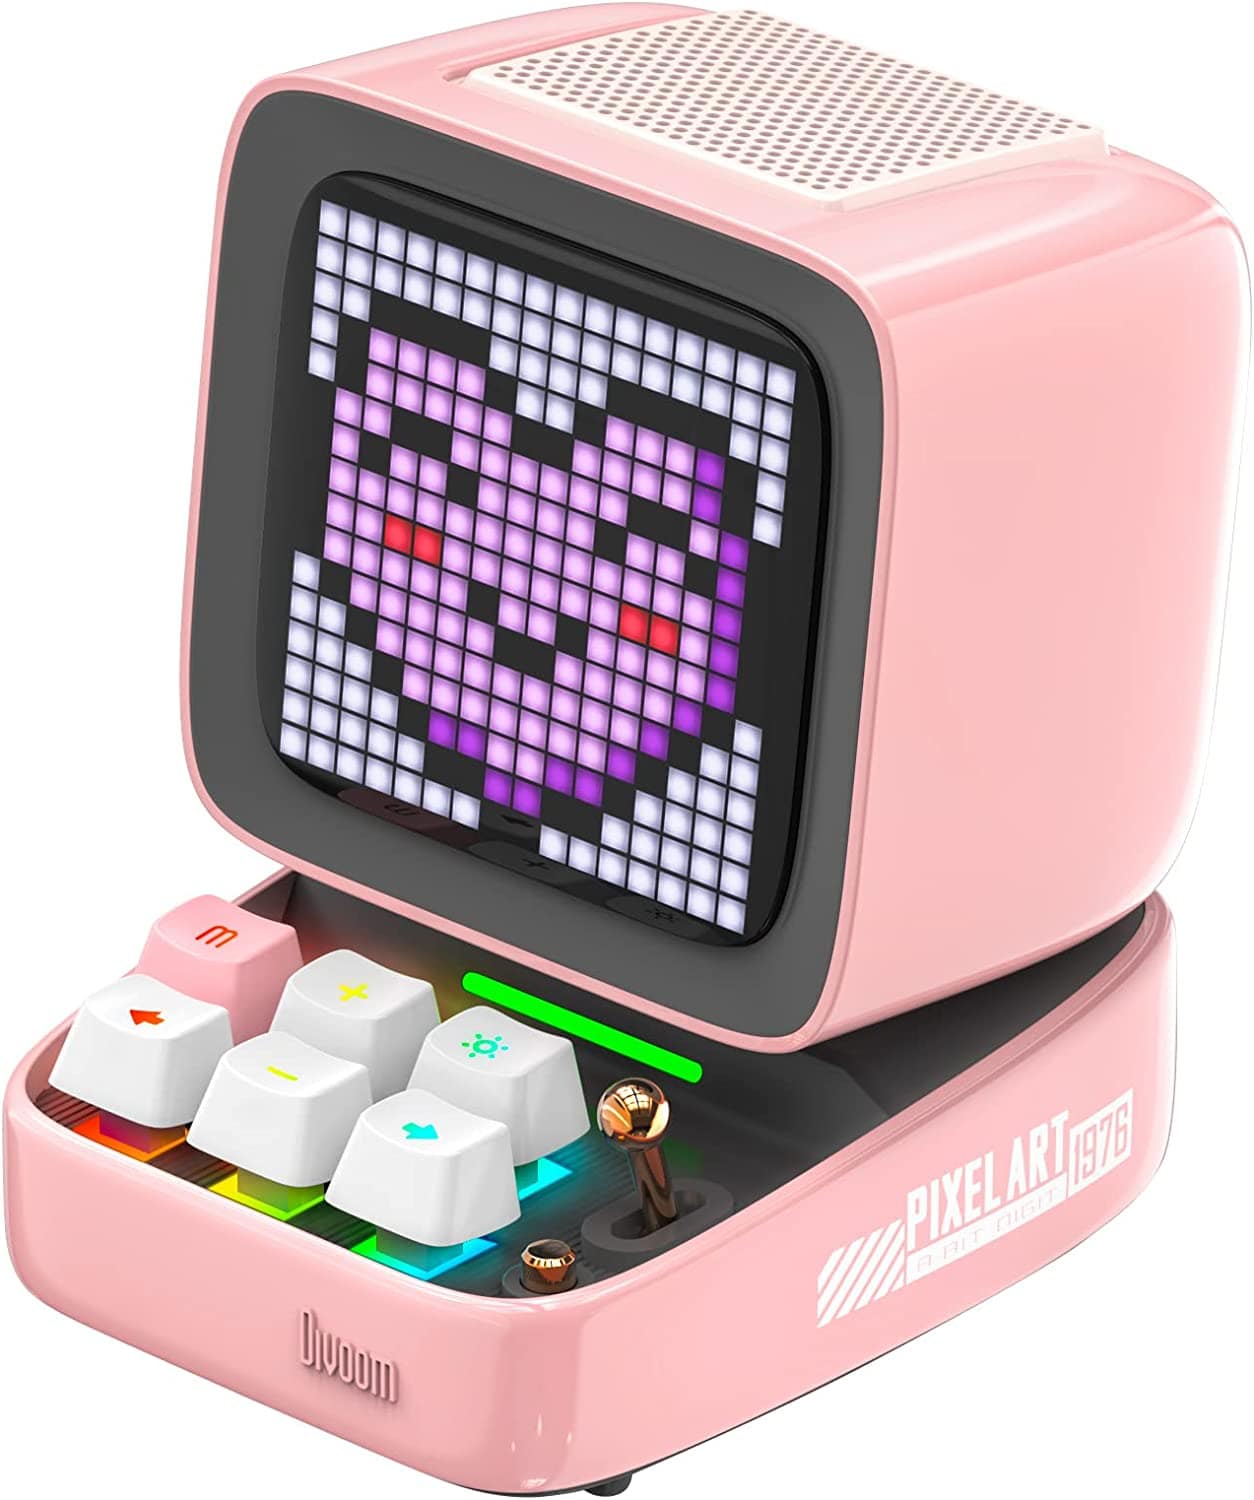 SmartTechShopping Electronics Pink Divoom Ditoo Retro Pixel Art Game Bluetooth Speaker - App-Controlled LED Screen (Pink)